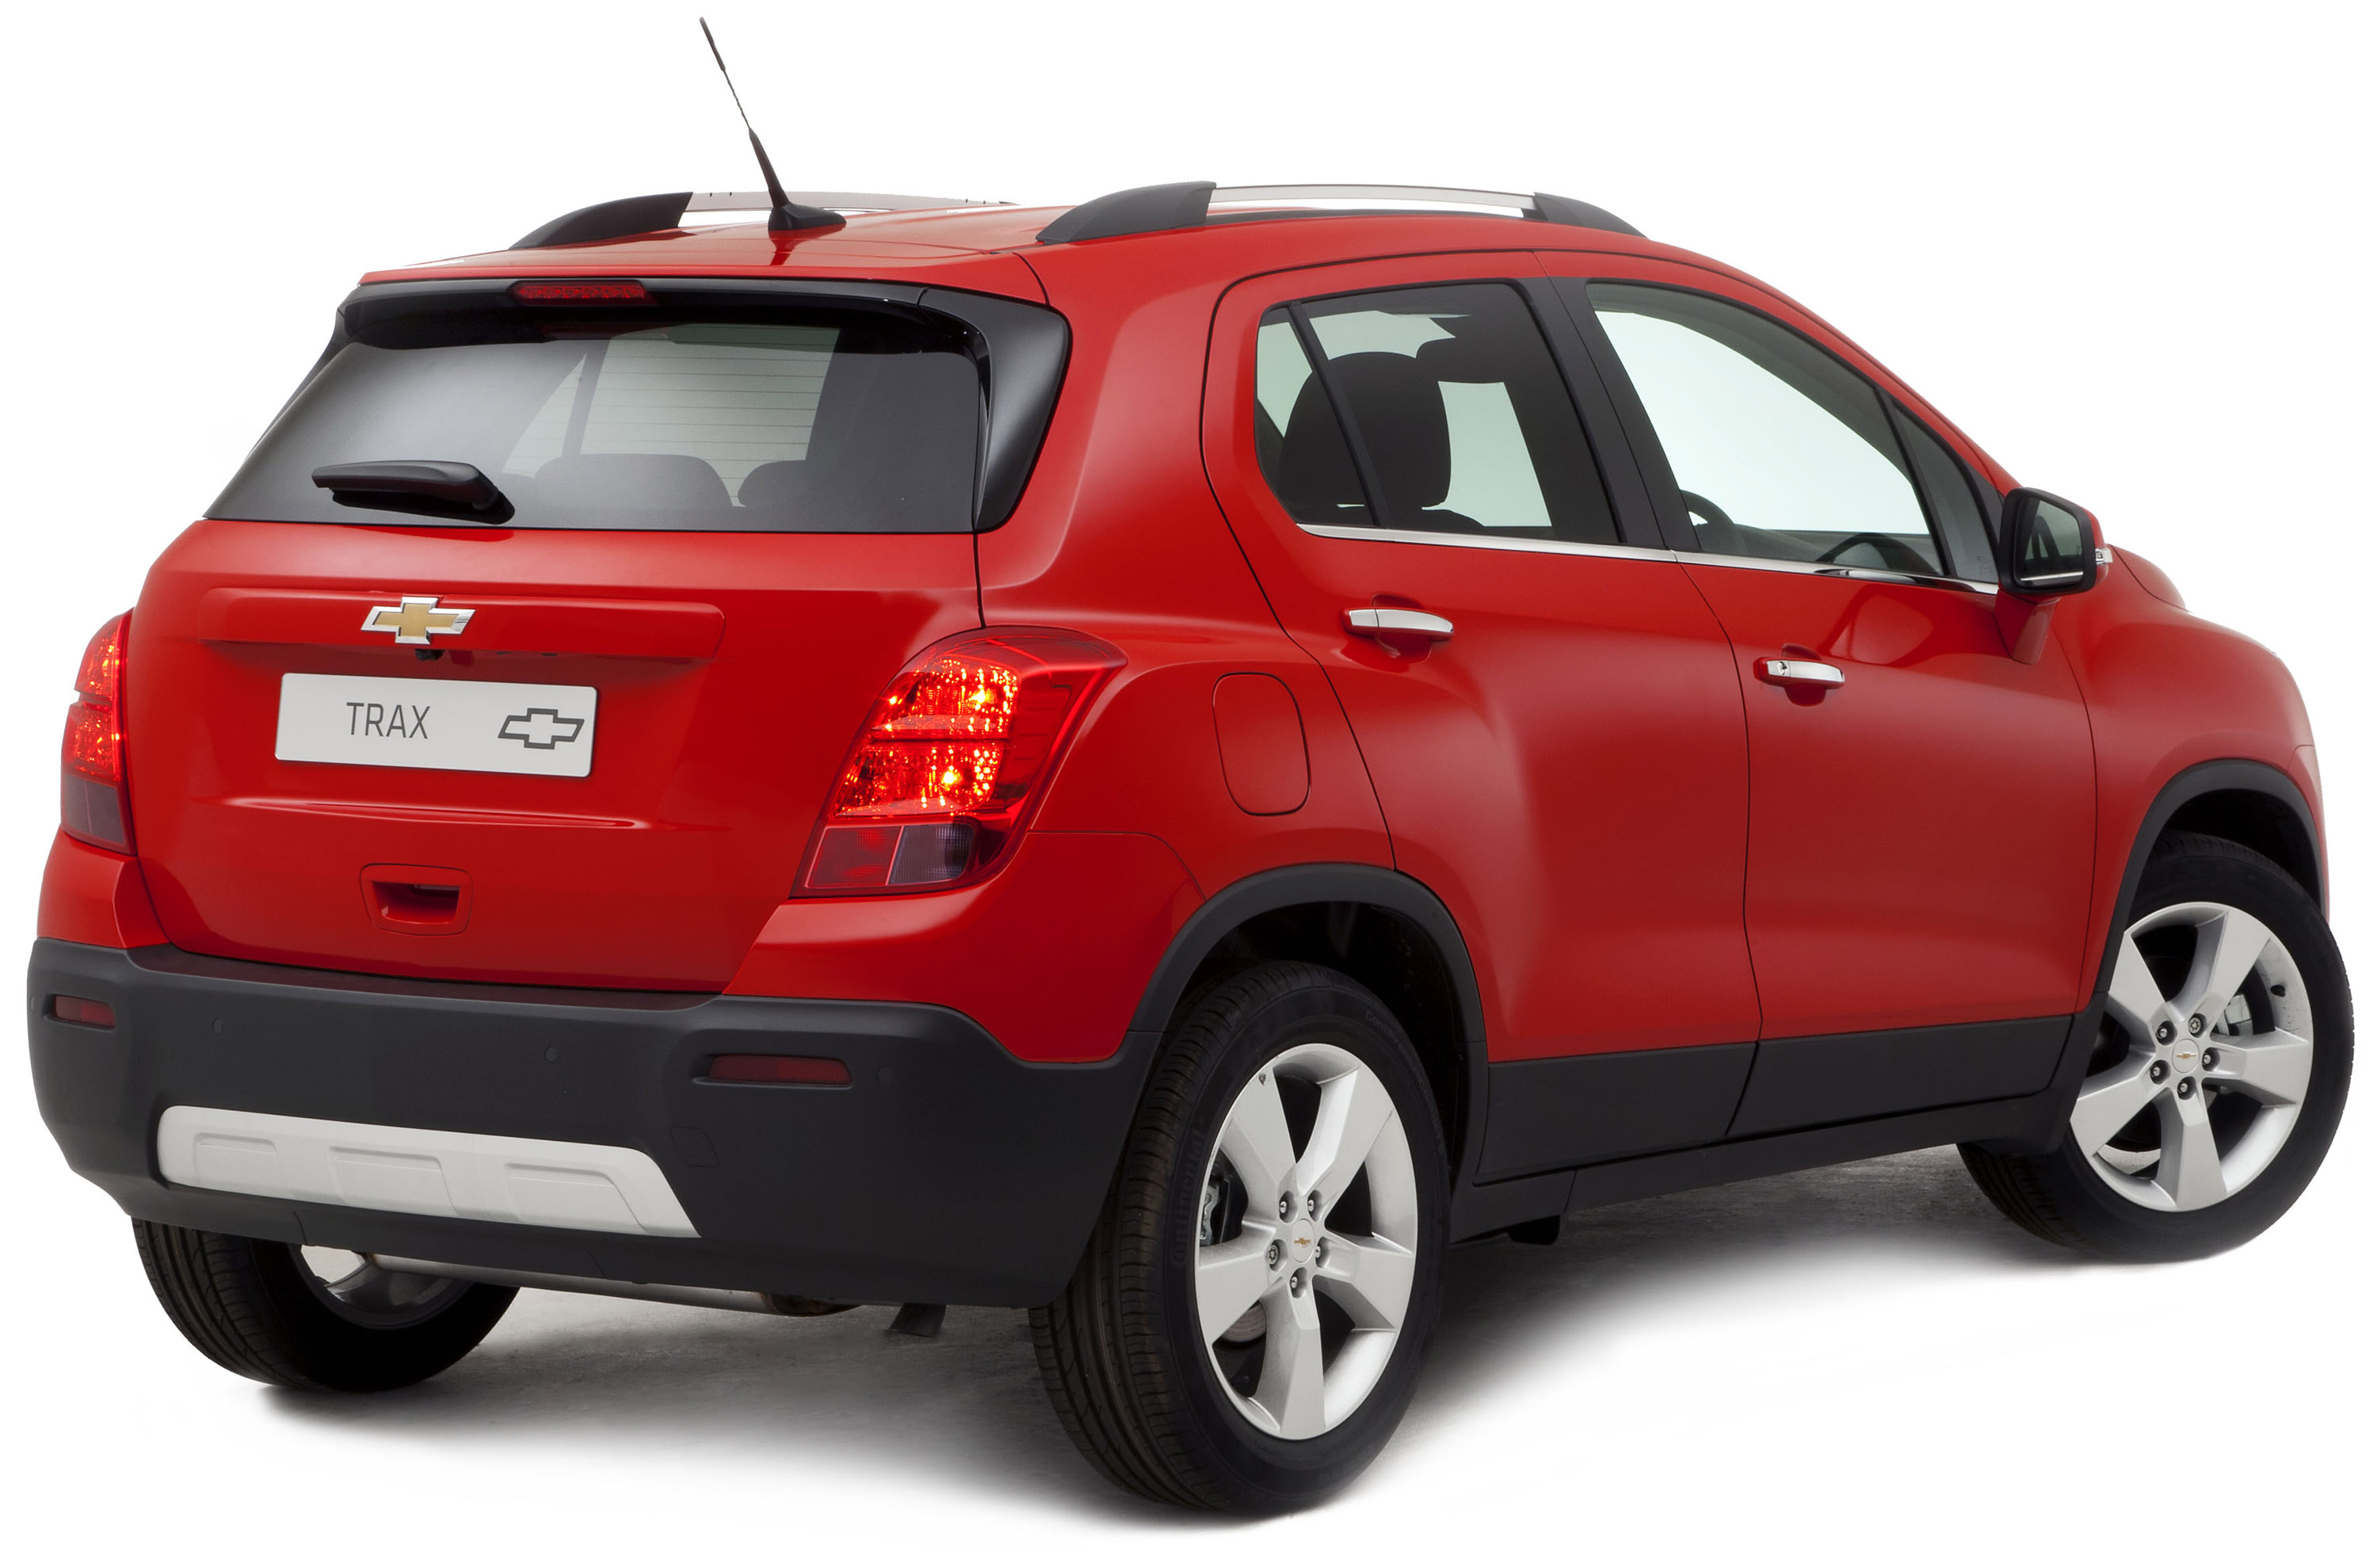 2013 Manchester United Chevrolet Trax - HD Pictures @ carsinvasion.com